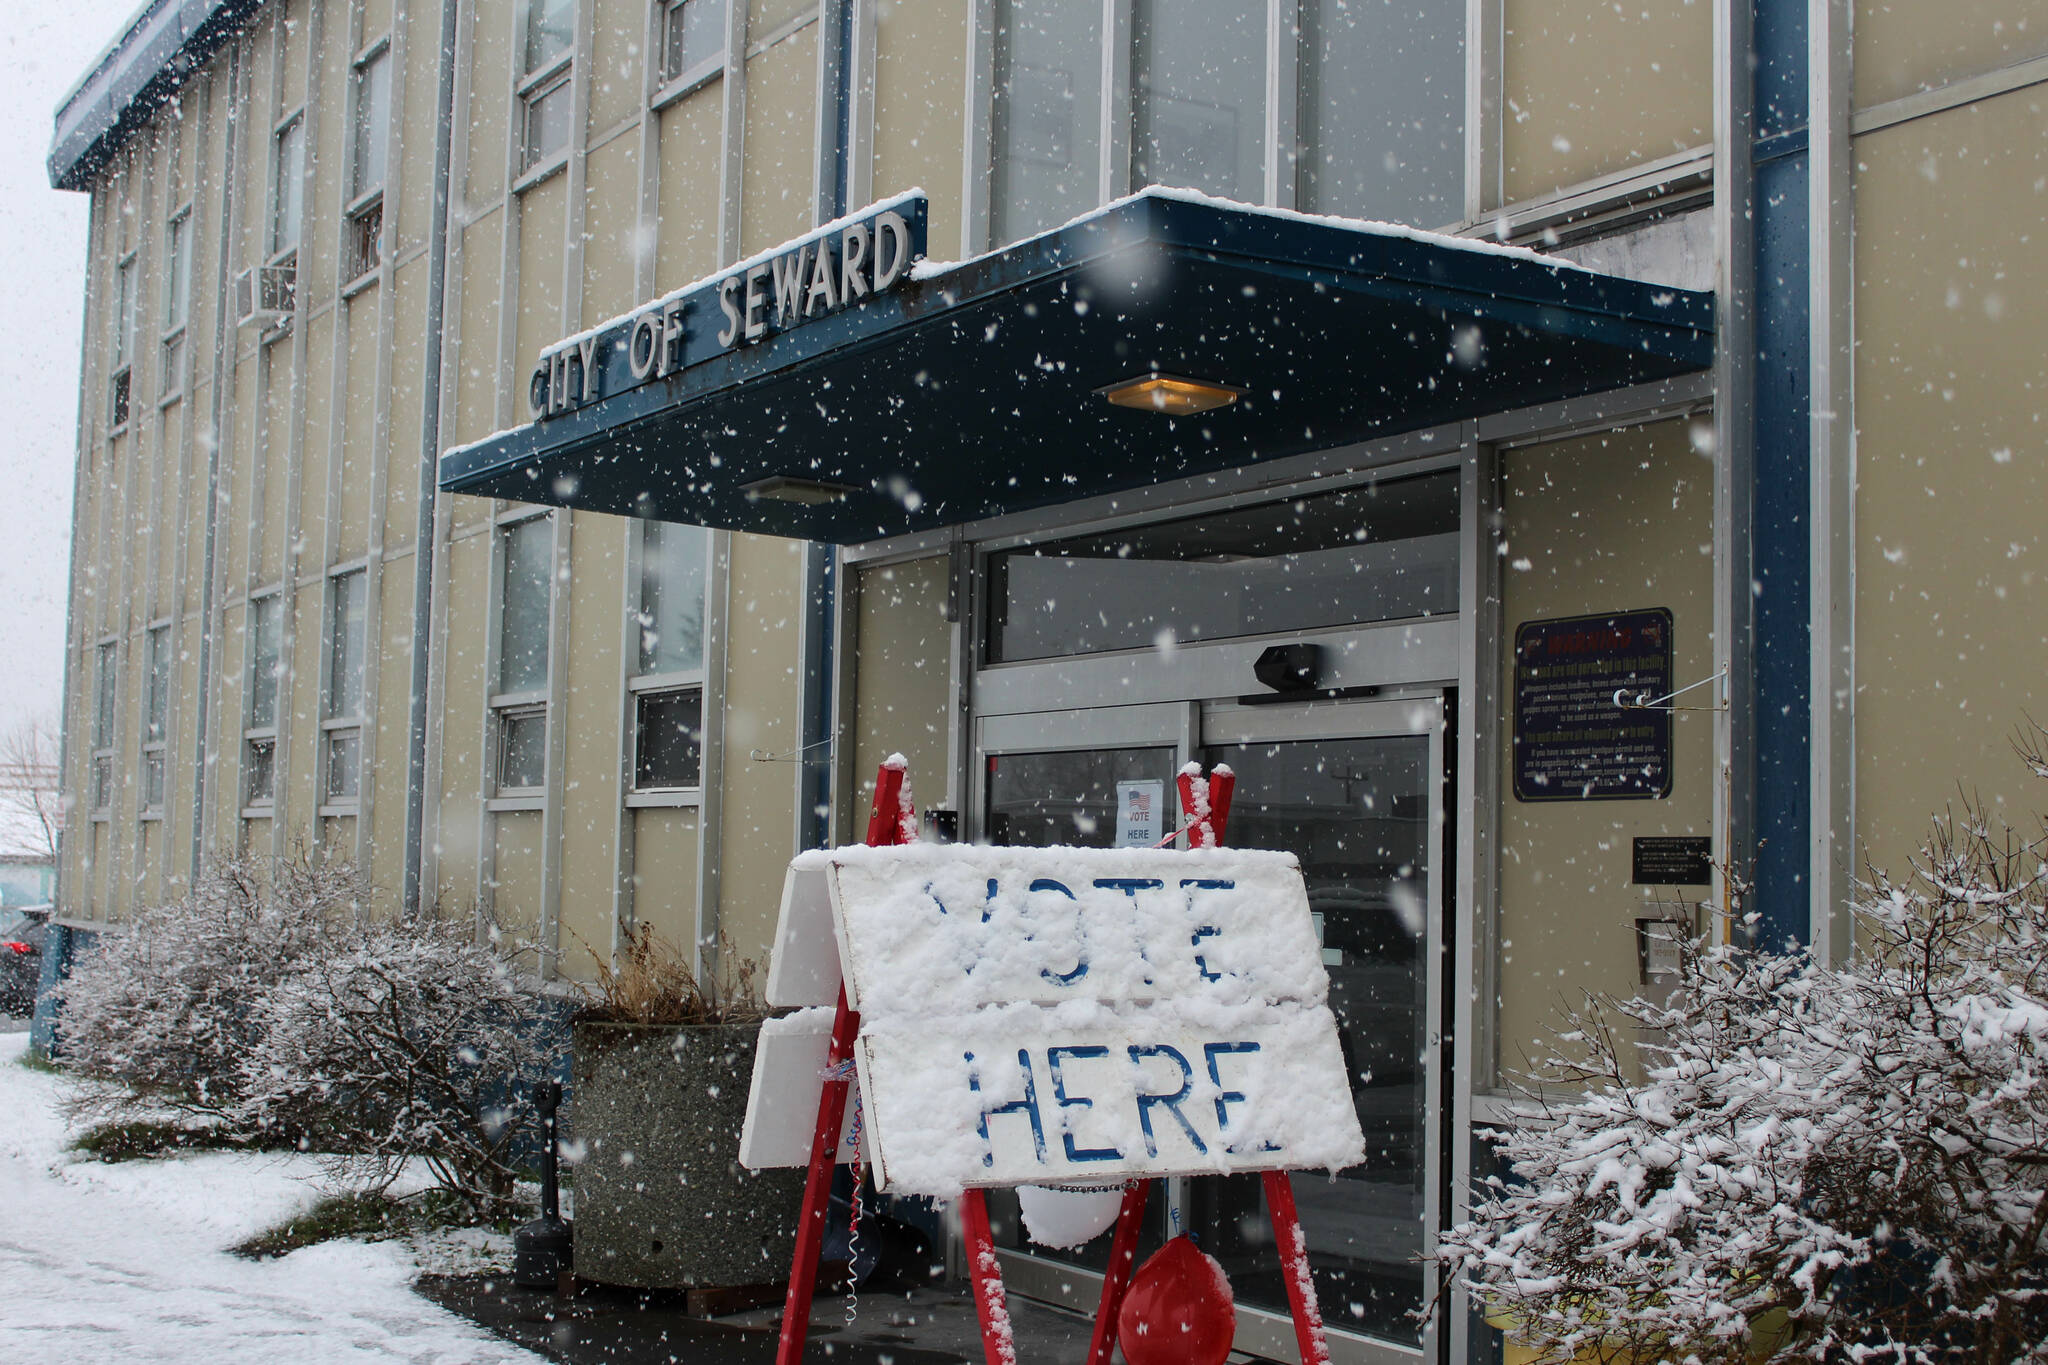 Snow falls on a "vote here" sign outside of Seward City Hall on Tuesday, May 2, 2023 in Seward, Alaska. Residents voted in a special election to determine whether or not to sell the city’s electric utility and to change the city’s residency requirements for city manager. (Ashlyn O’Hara/Peninsula Clarion)